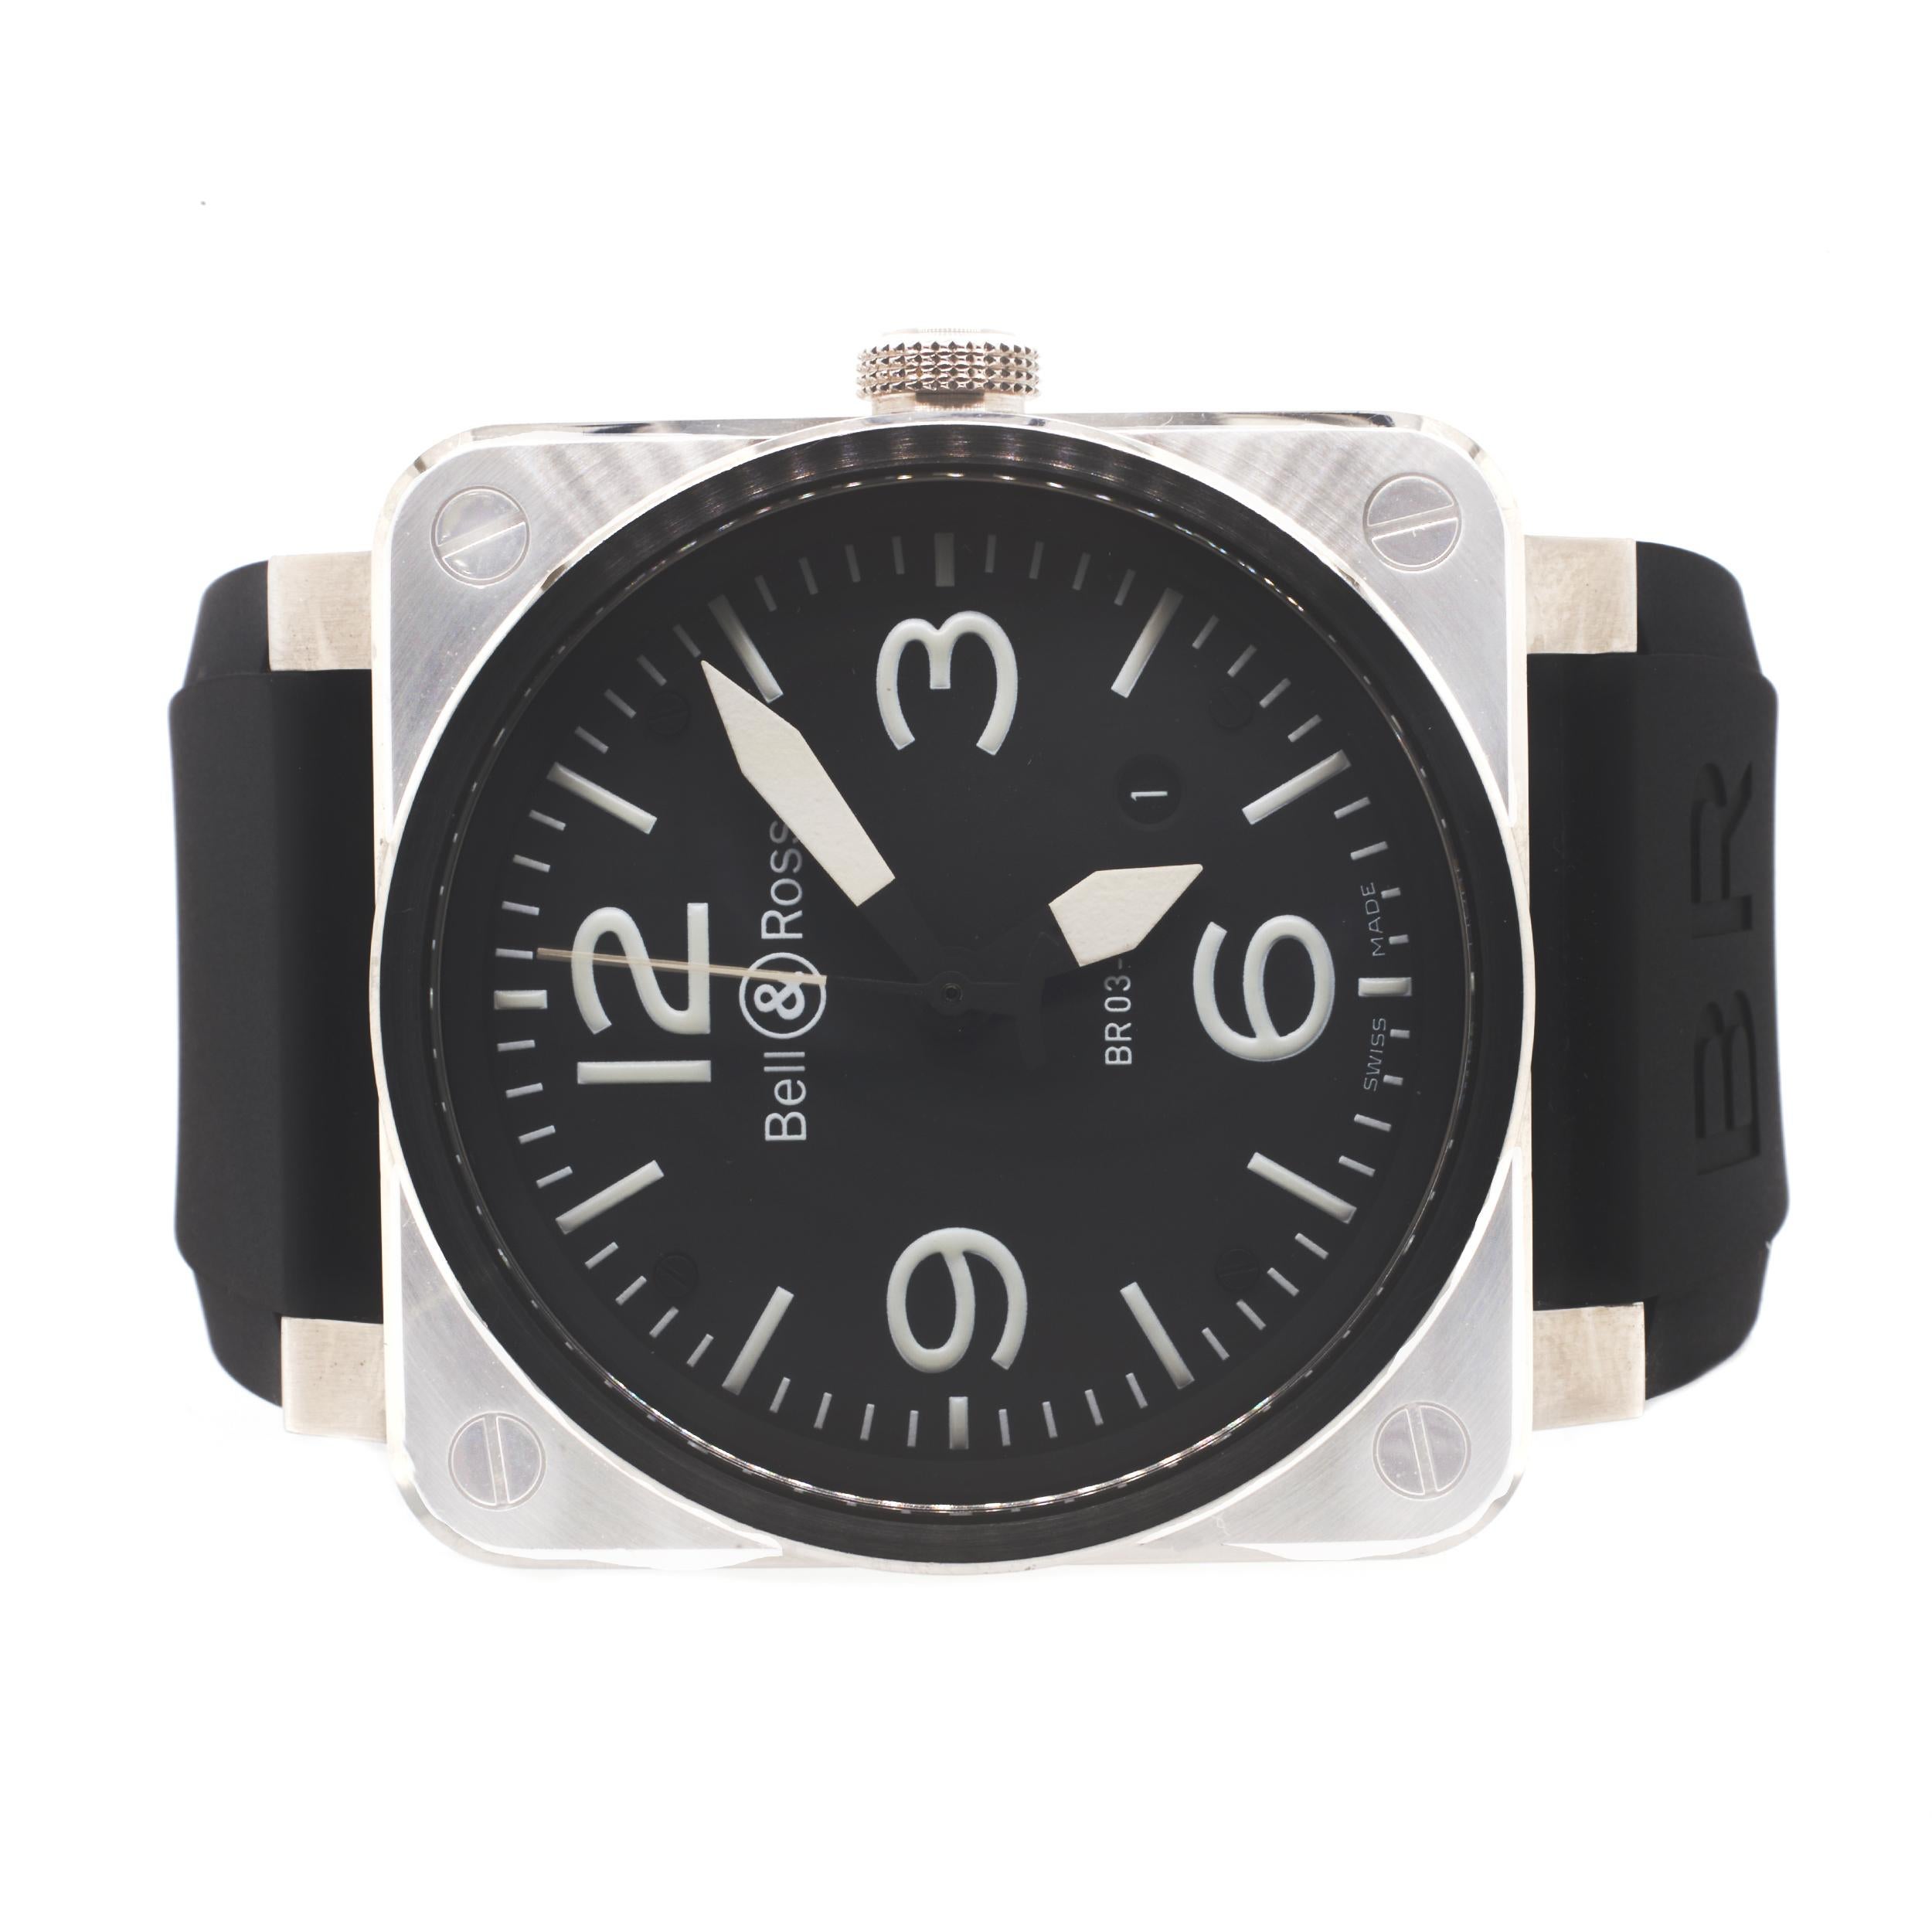 Movement: automatic
Function: hours, minutes, seconds, date
Case: 42mm square case with scratch resistant sapphire crystal, push-pull crown
Band: black B&R strap with buckle
Dial: black dial, white hands and hour markers 
Reference #: